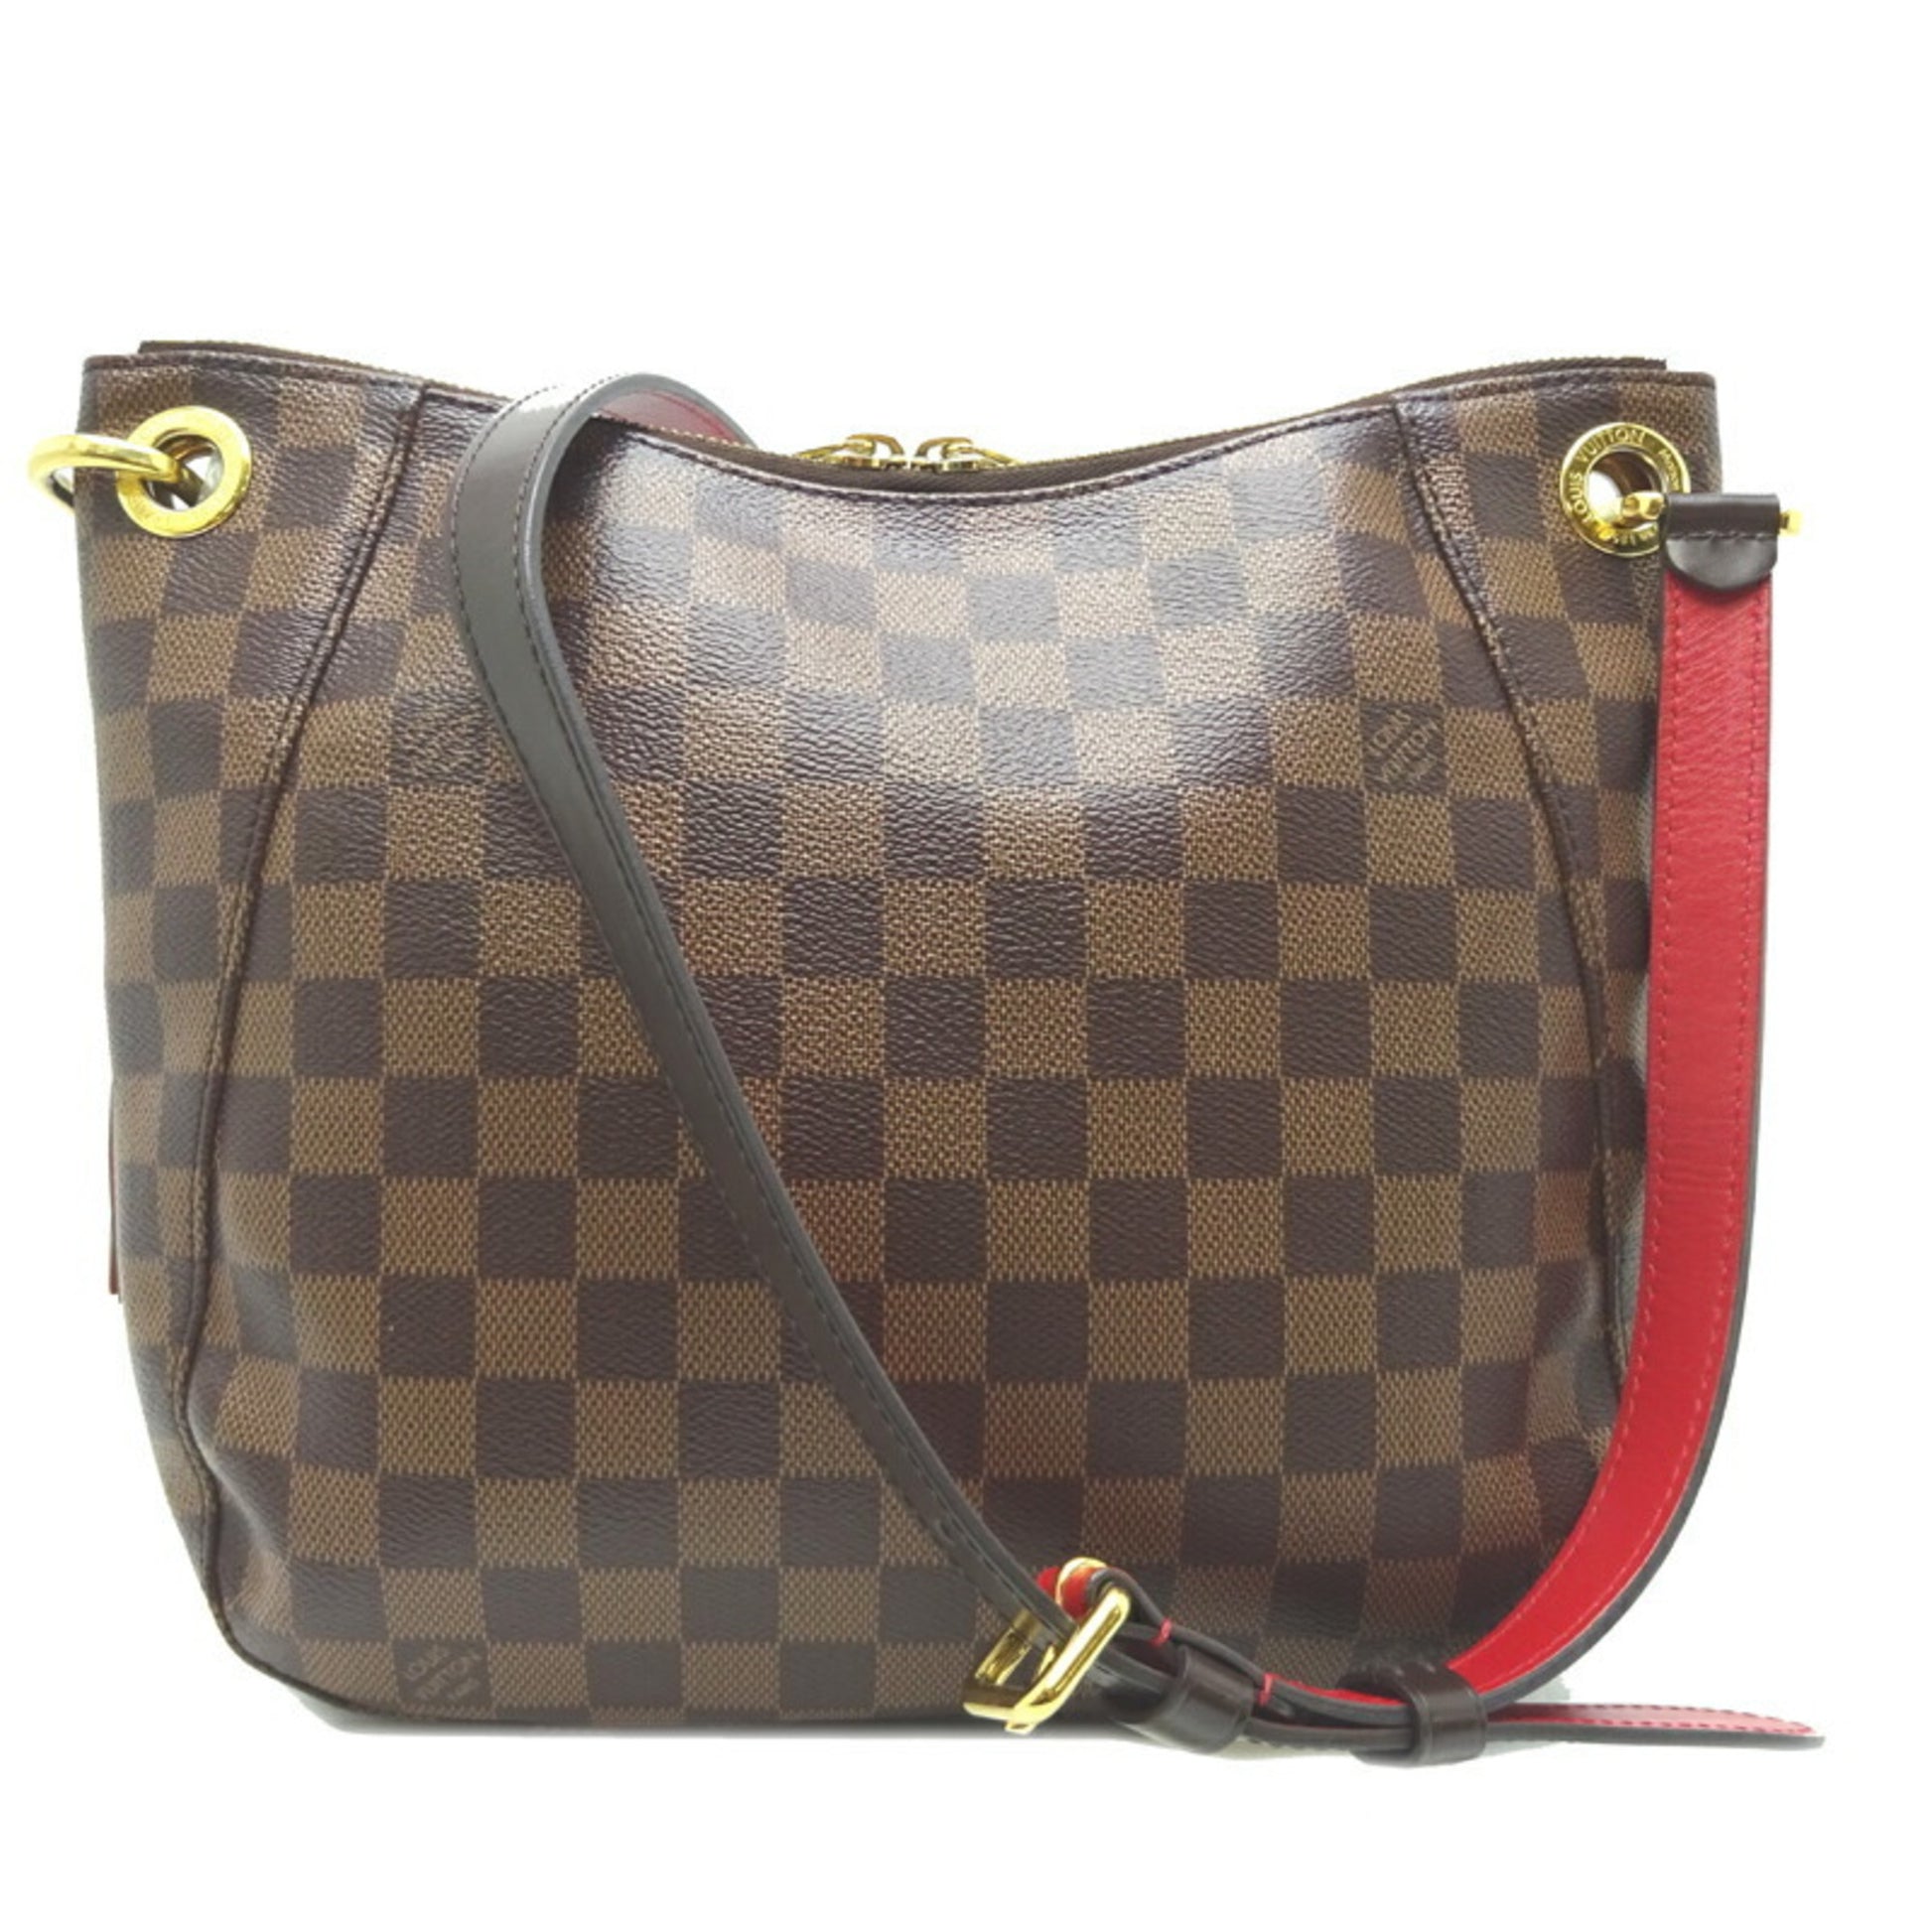 Authenticated Used Louis Vuitton South Bank Women's Shoulder Bag N42230  Damier Ebene (Brown) 